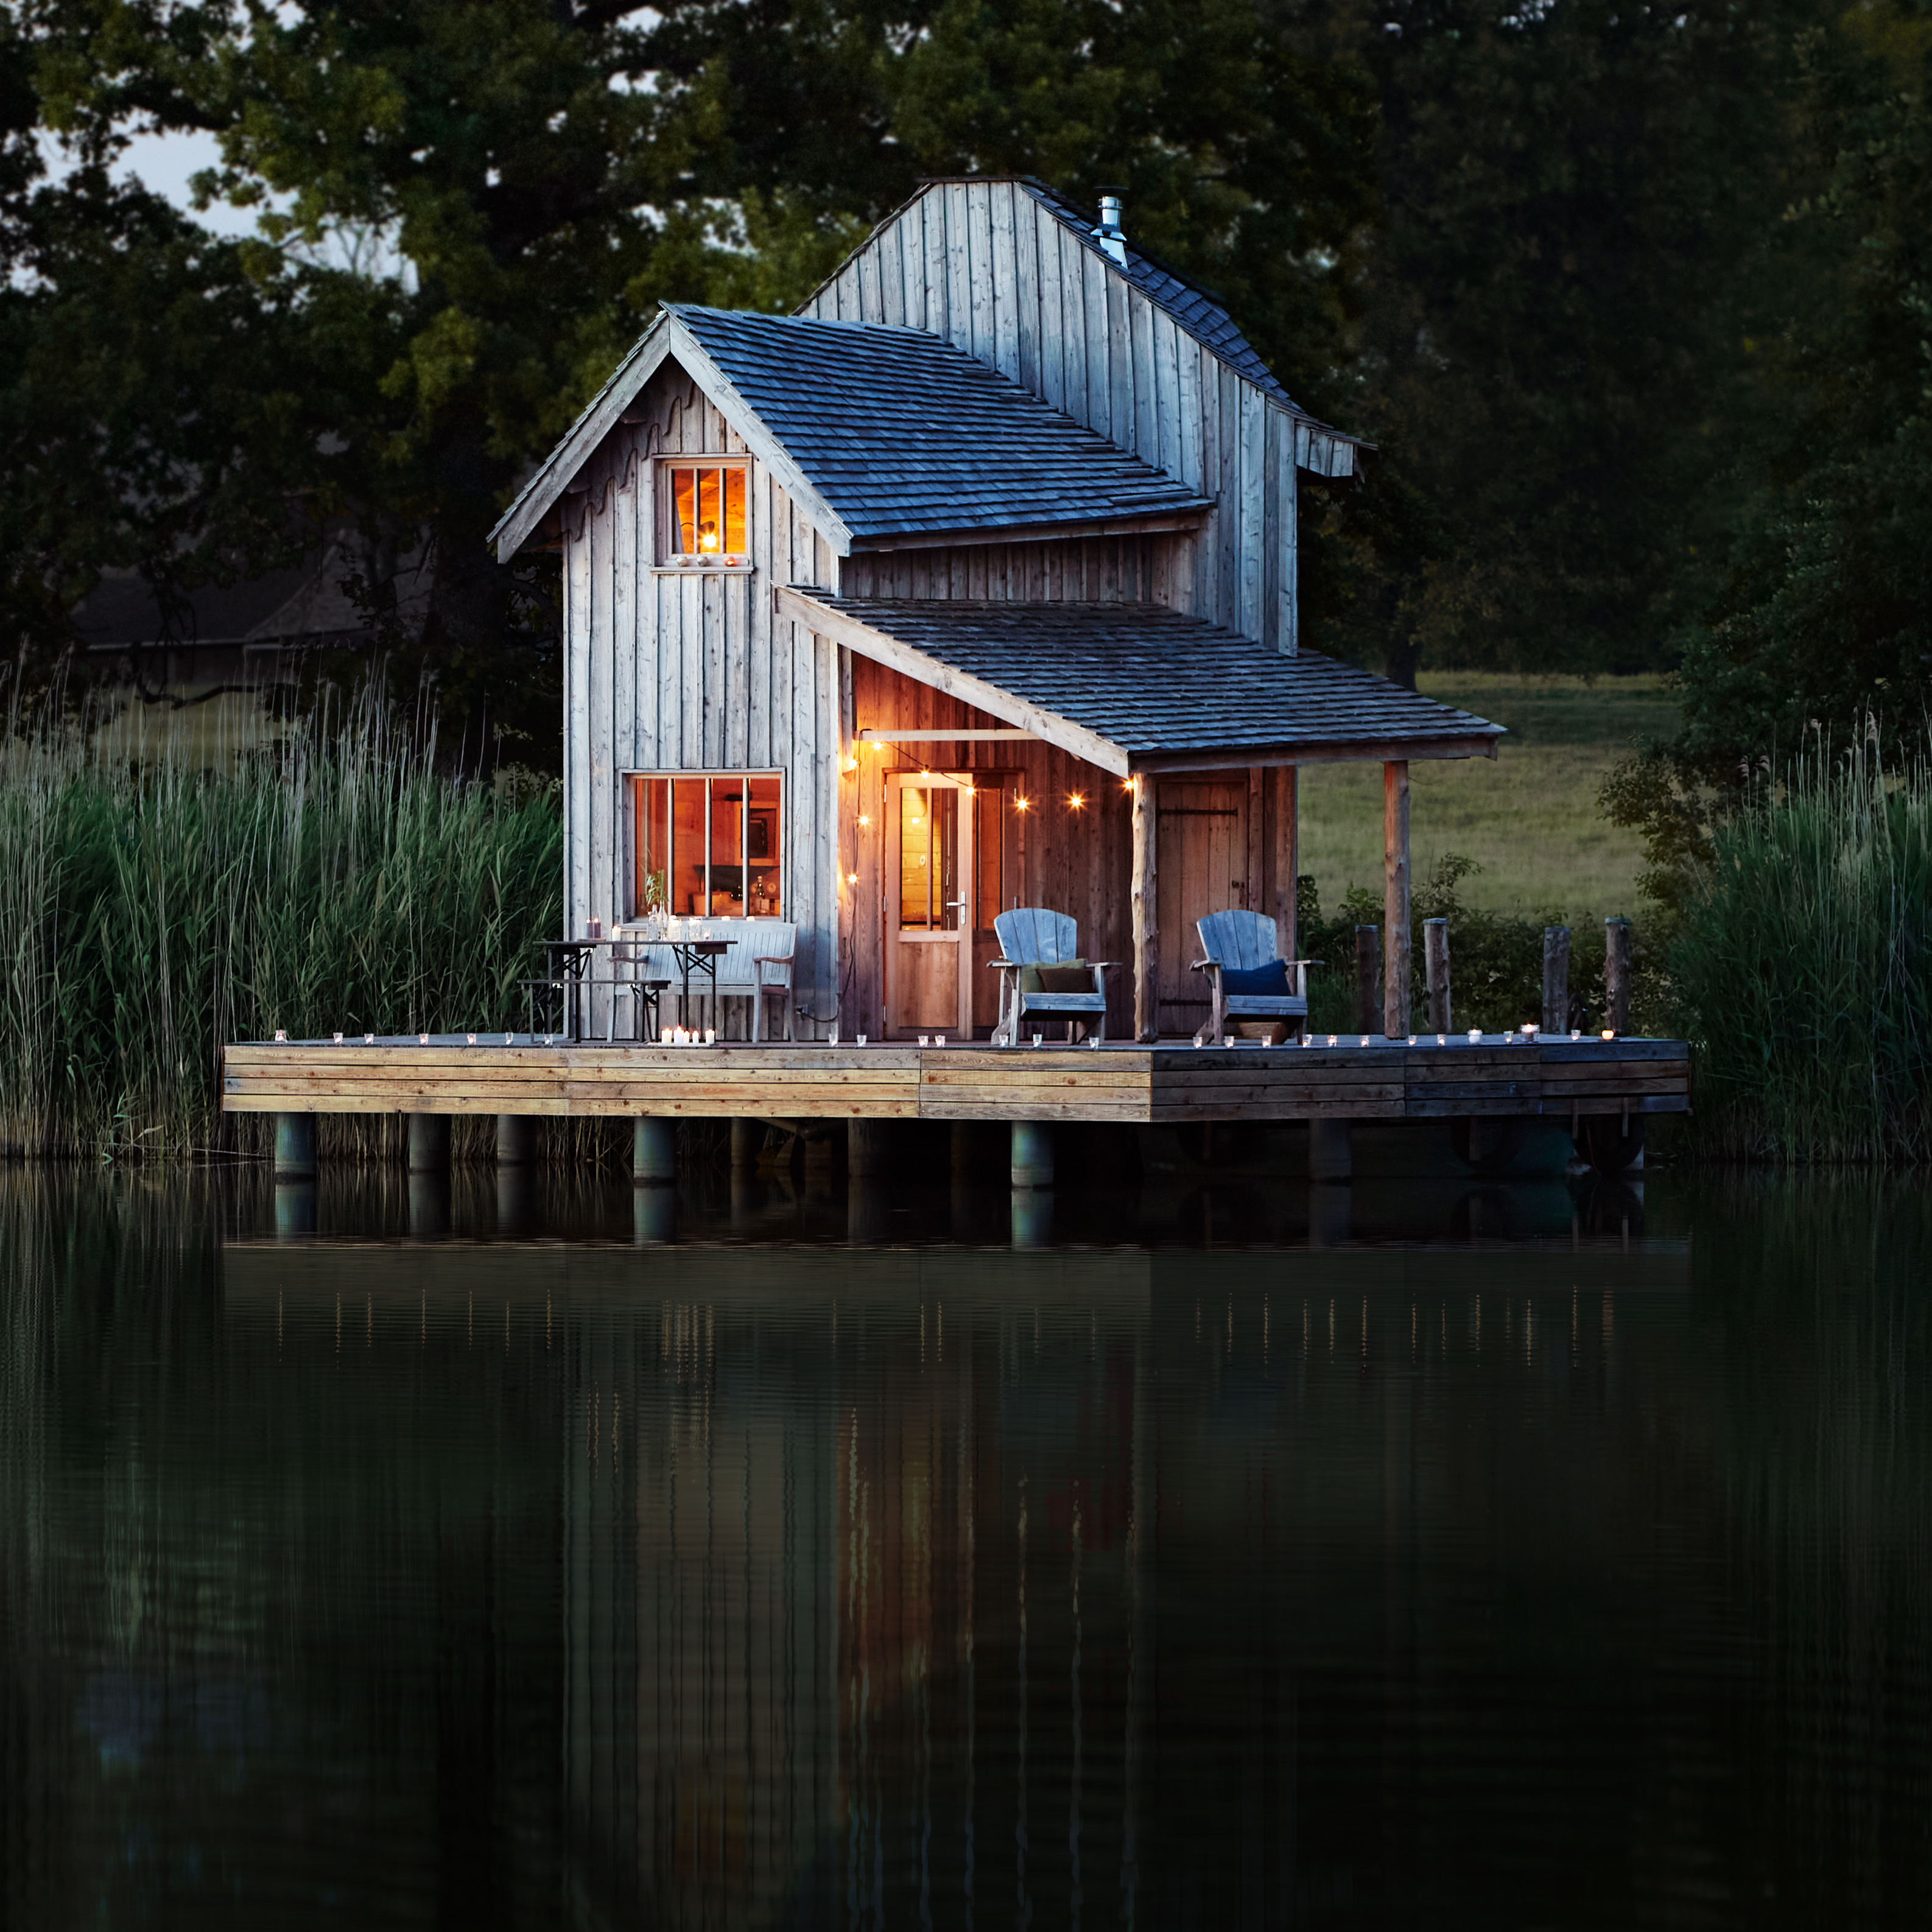 Lake house vacation rentals, Lakefront cabins | Airbnb